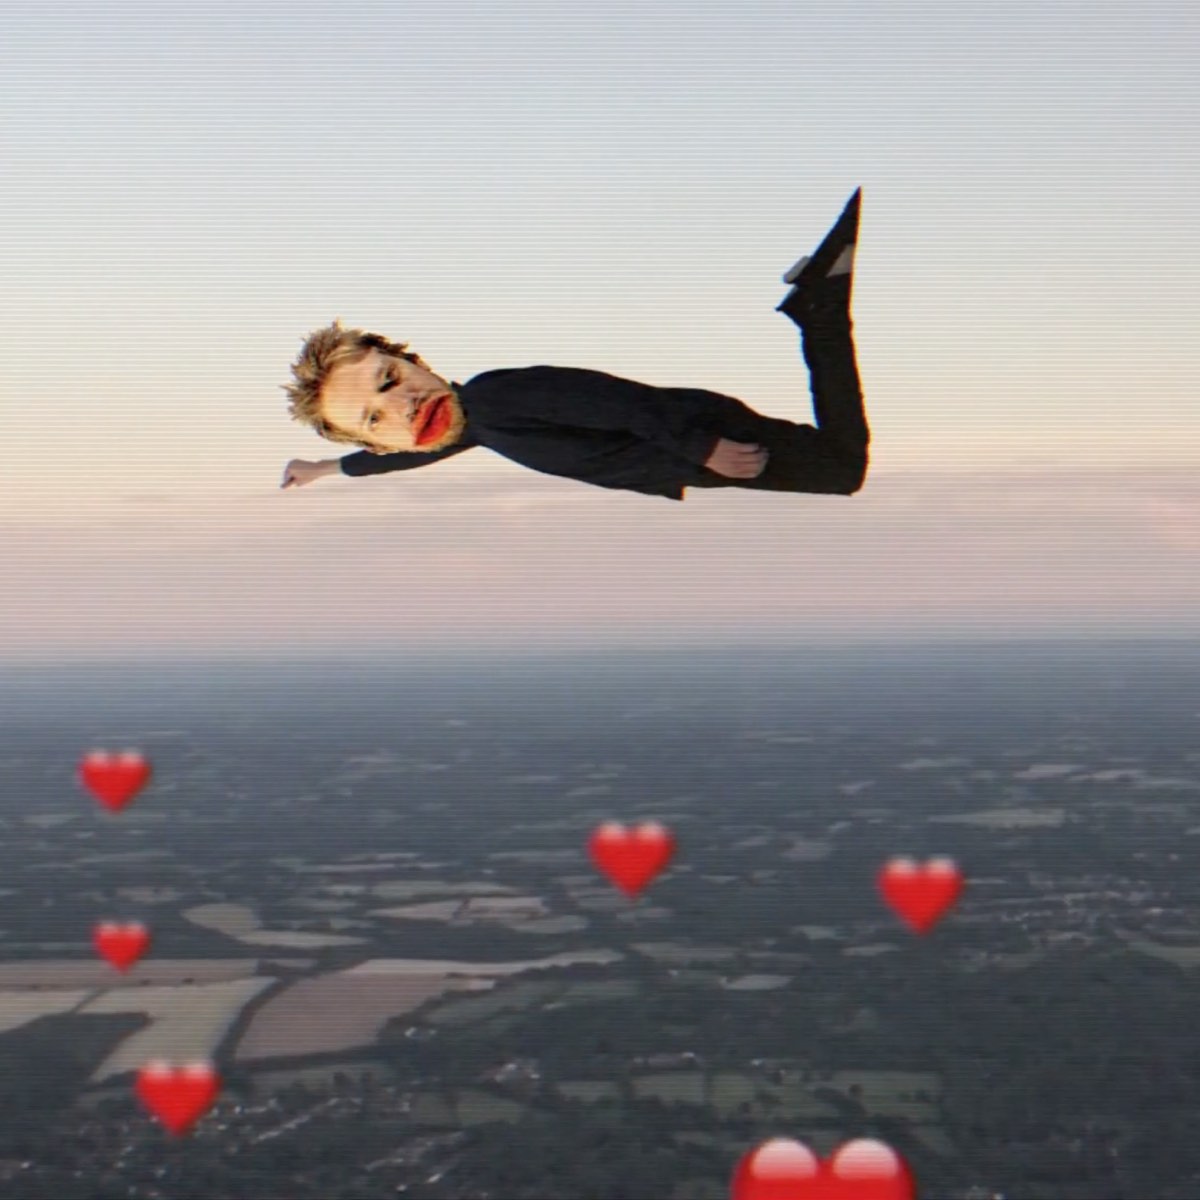 spencer avatar flying over fields with heart emojis